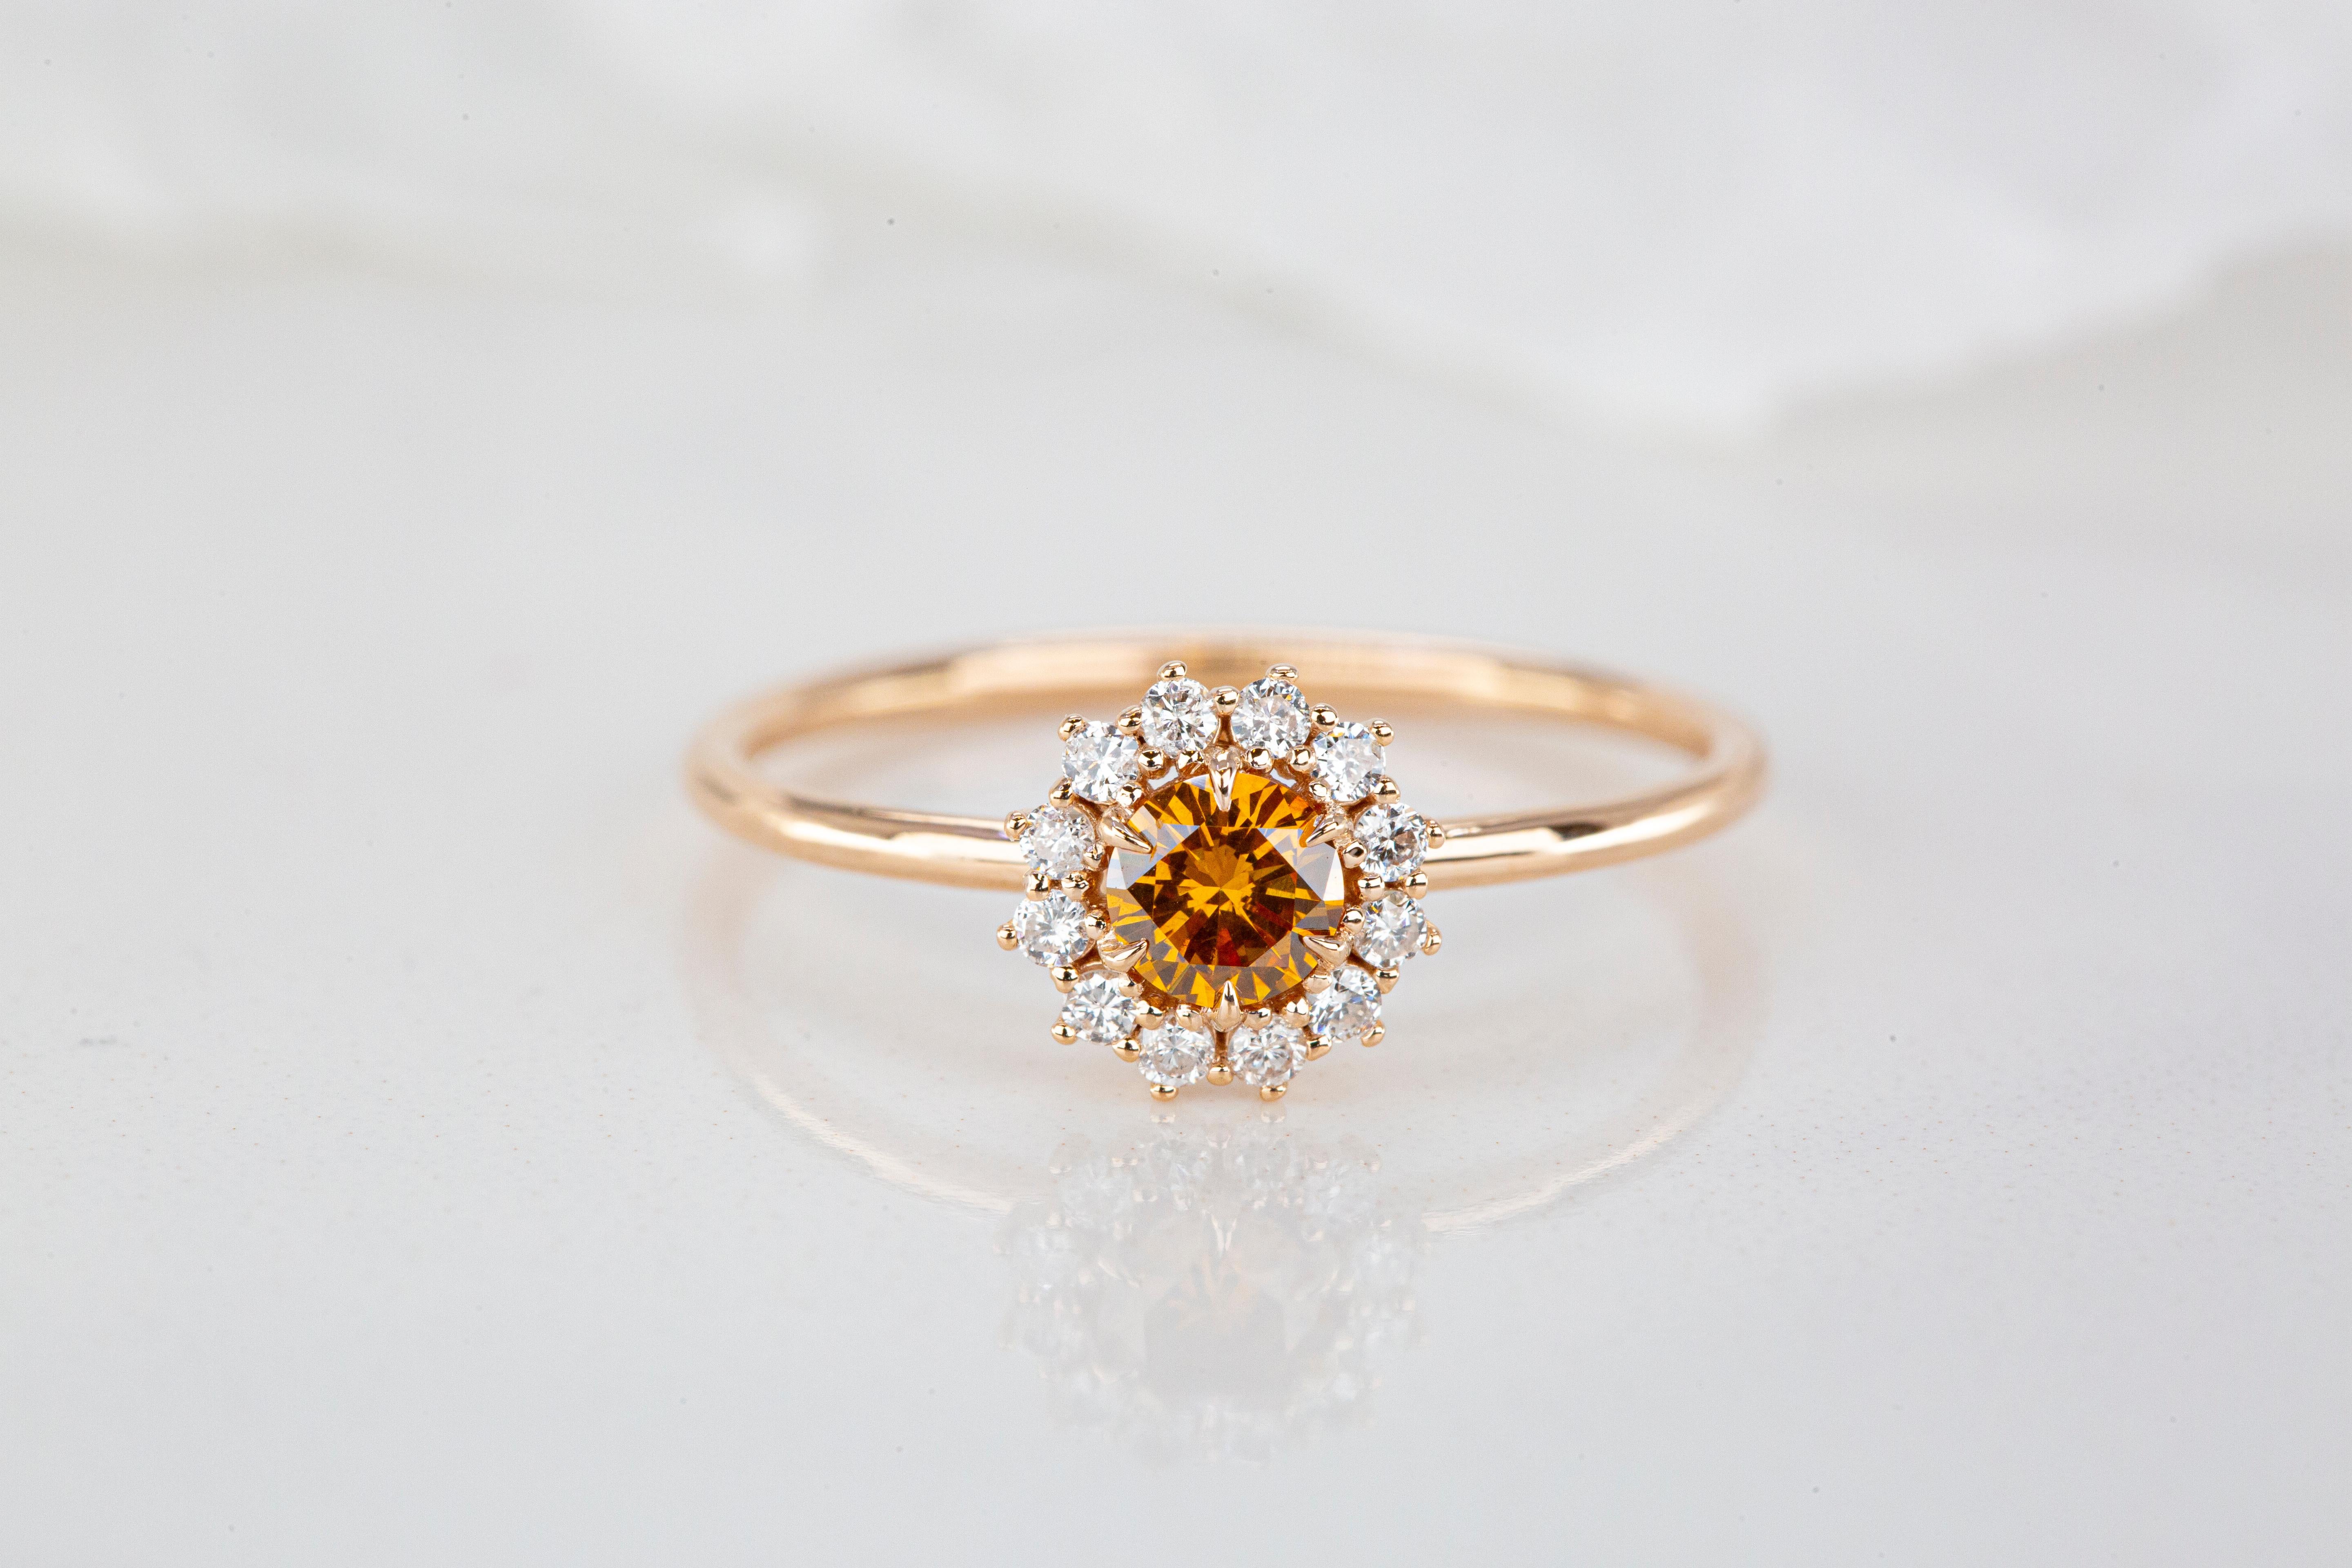 For Sale:  GIA 0.24 Ct. Fancy Deep Yellow-Orange Diamond 14K Gold Solitaire Ring 4